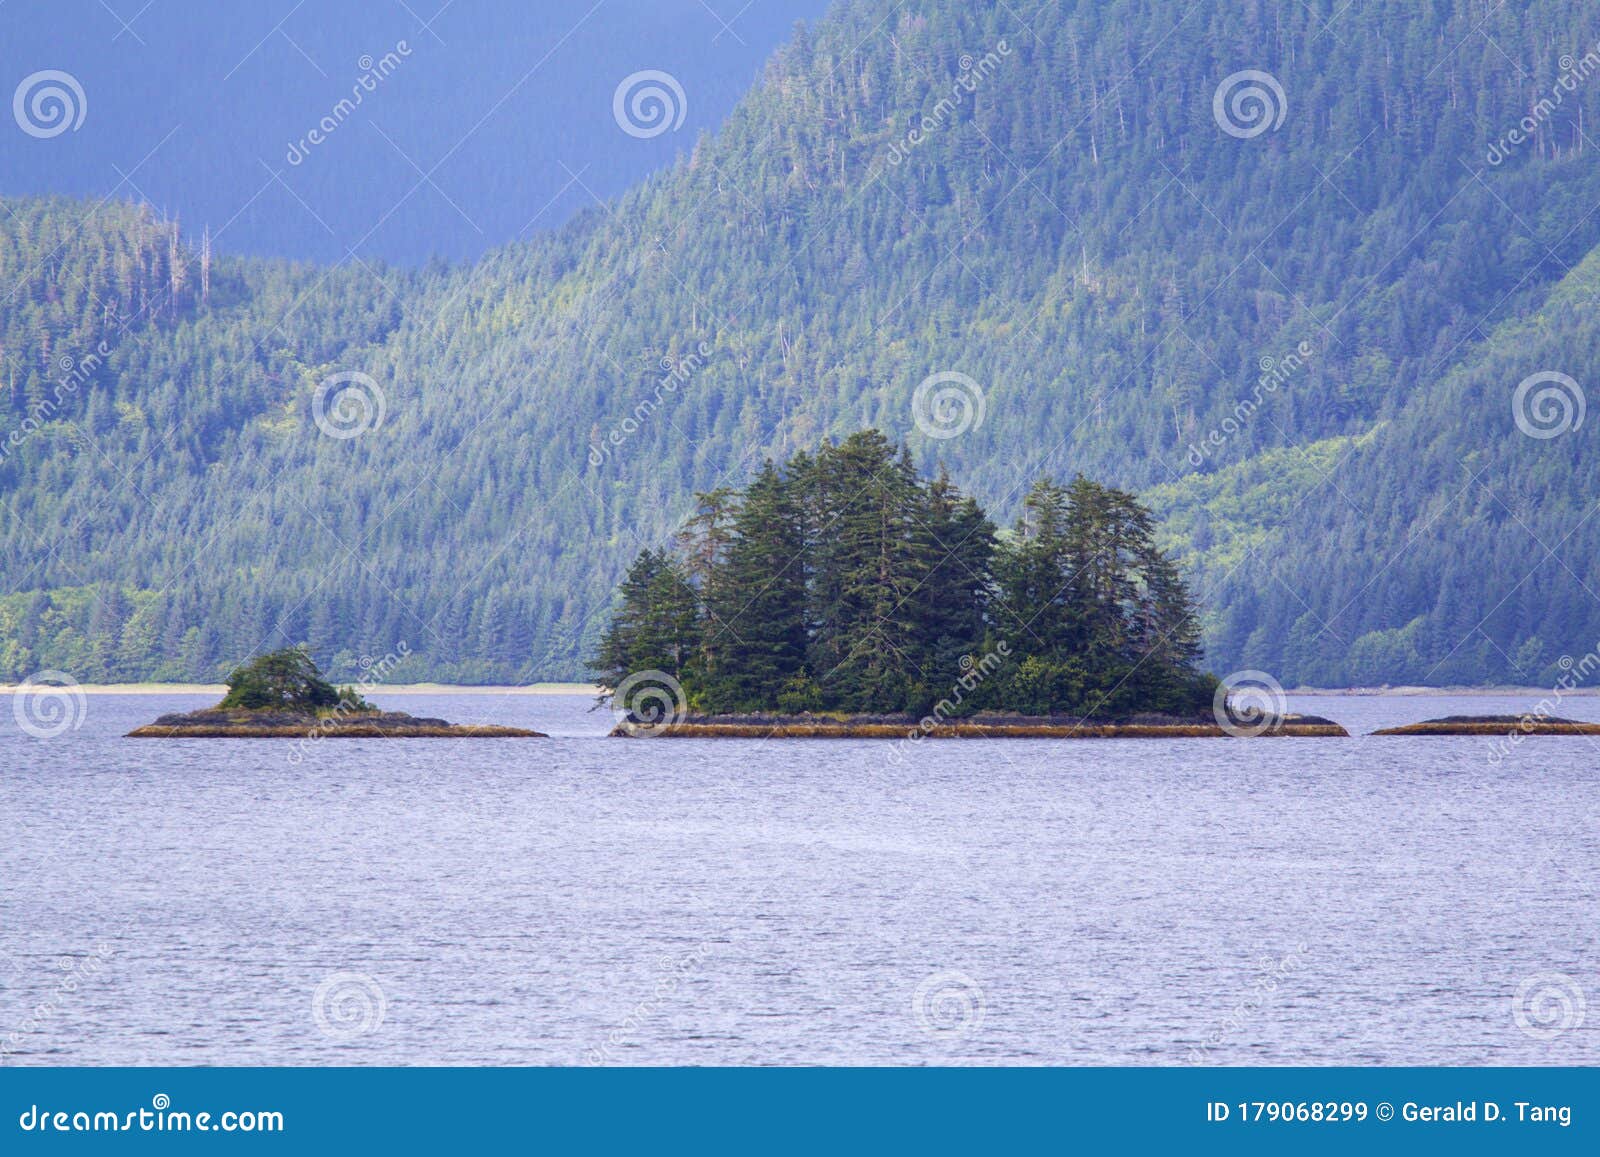 cloudy forest peril strait   845453